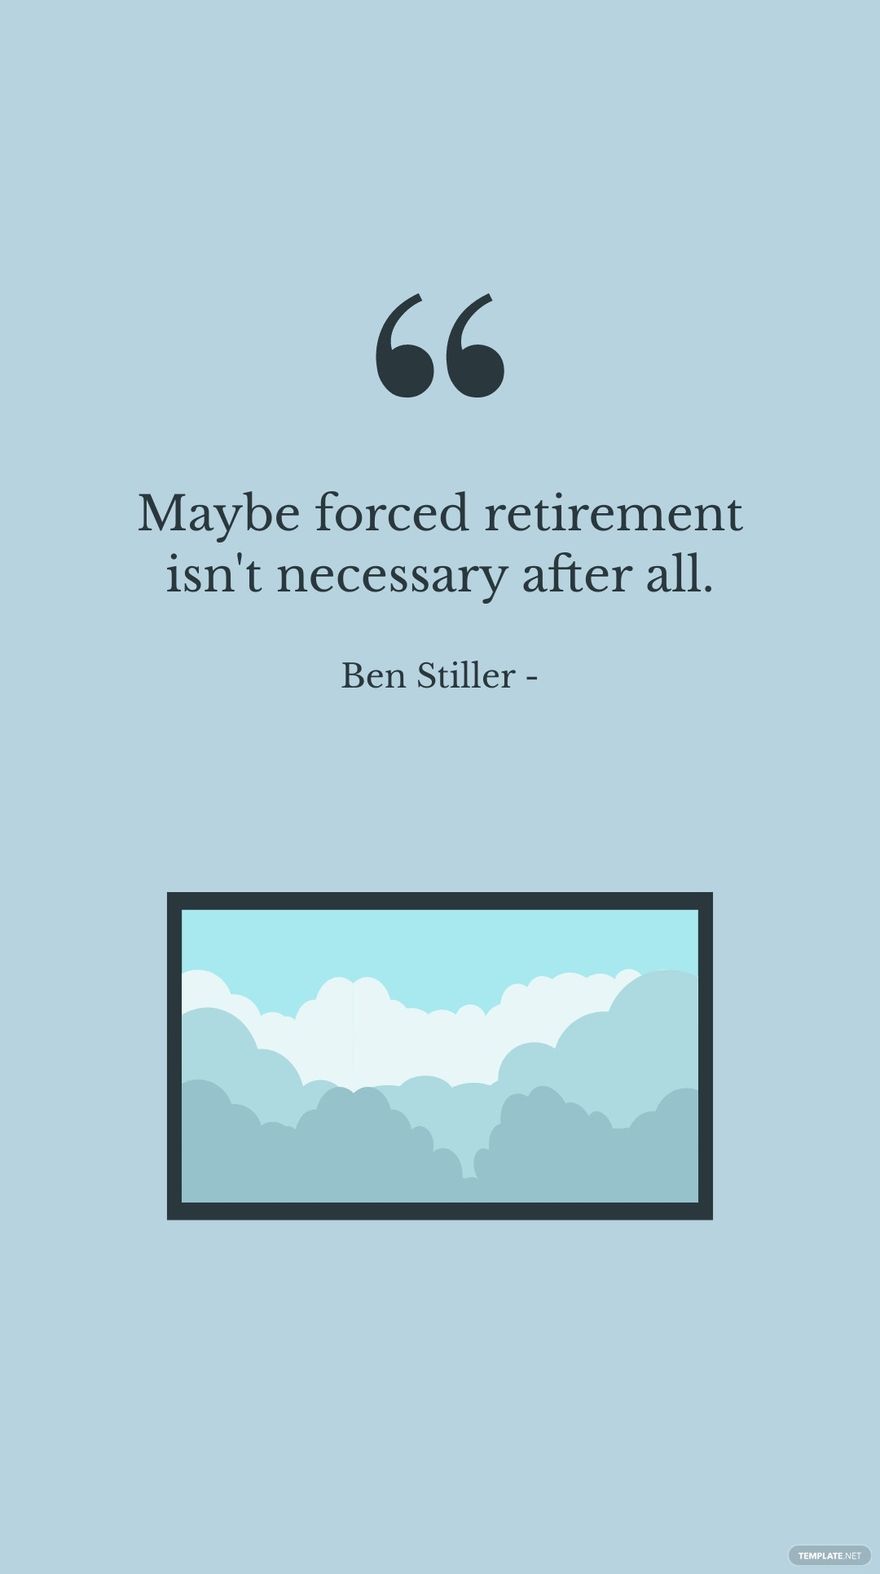 Ben Stiller - Maybe forced retirement isn't necessary after all.